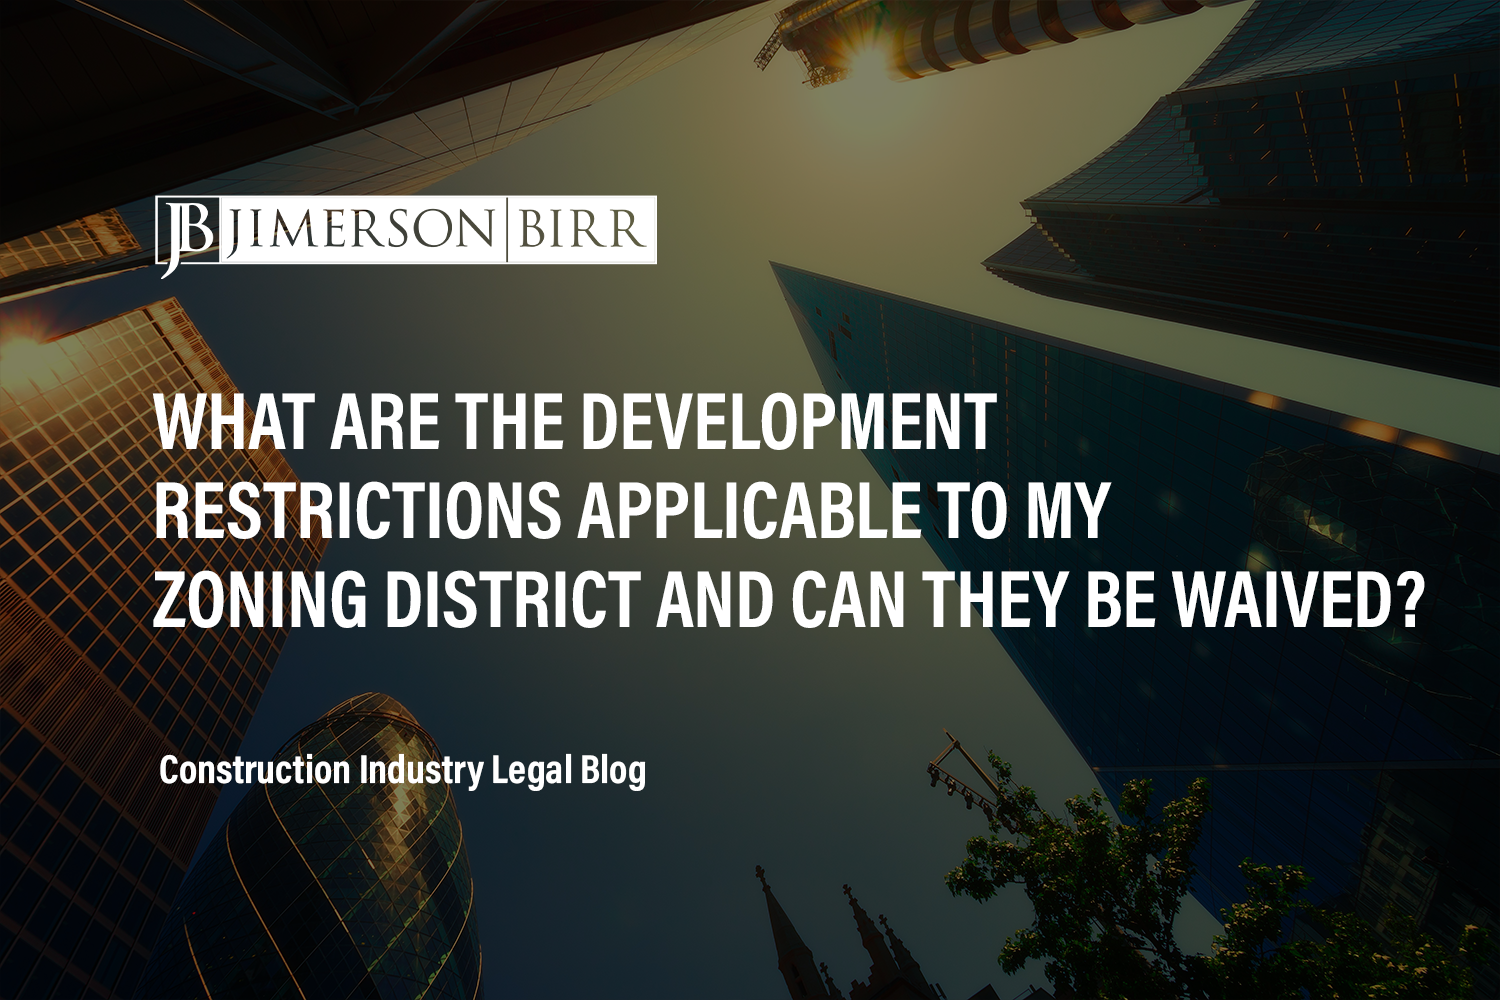 What Are the Development Restrictions Applicable to My Zoning District and Can They Be Waived?